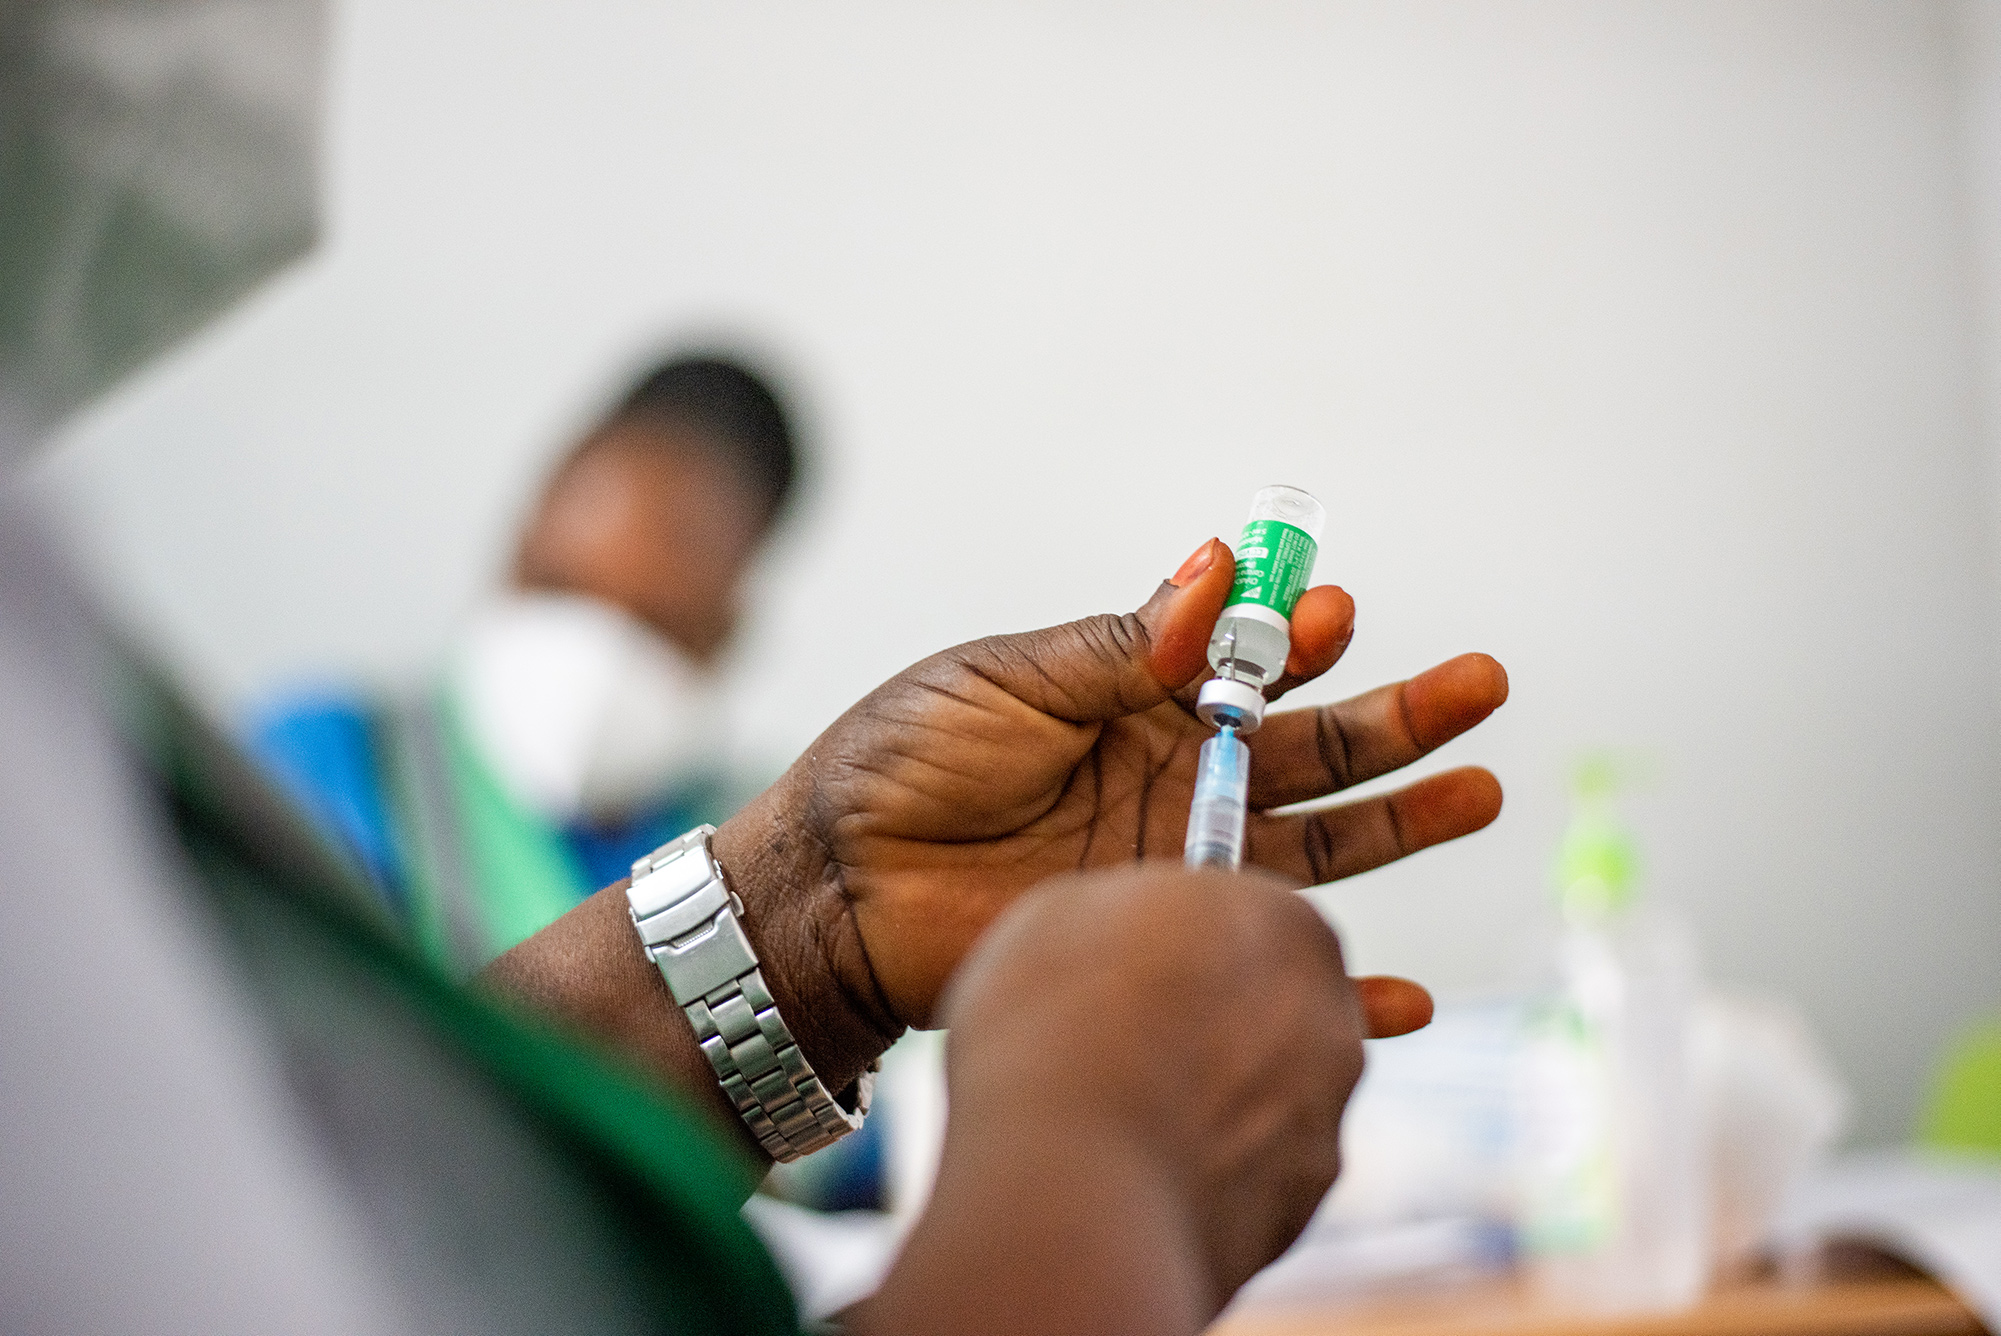 A health worker prepares the COVID-19 vaccine at the Abuja National Hospital in Abuja, Nigeria on March 5, 2021.